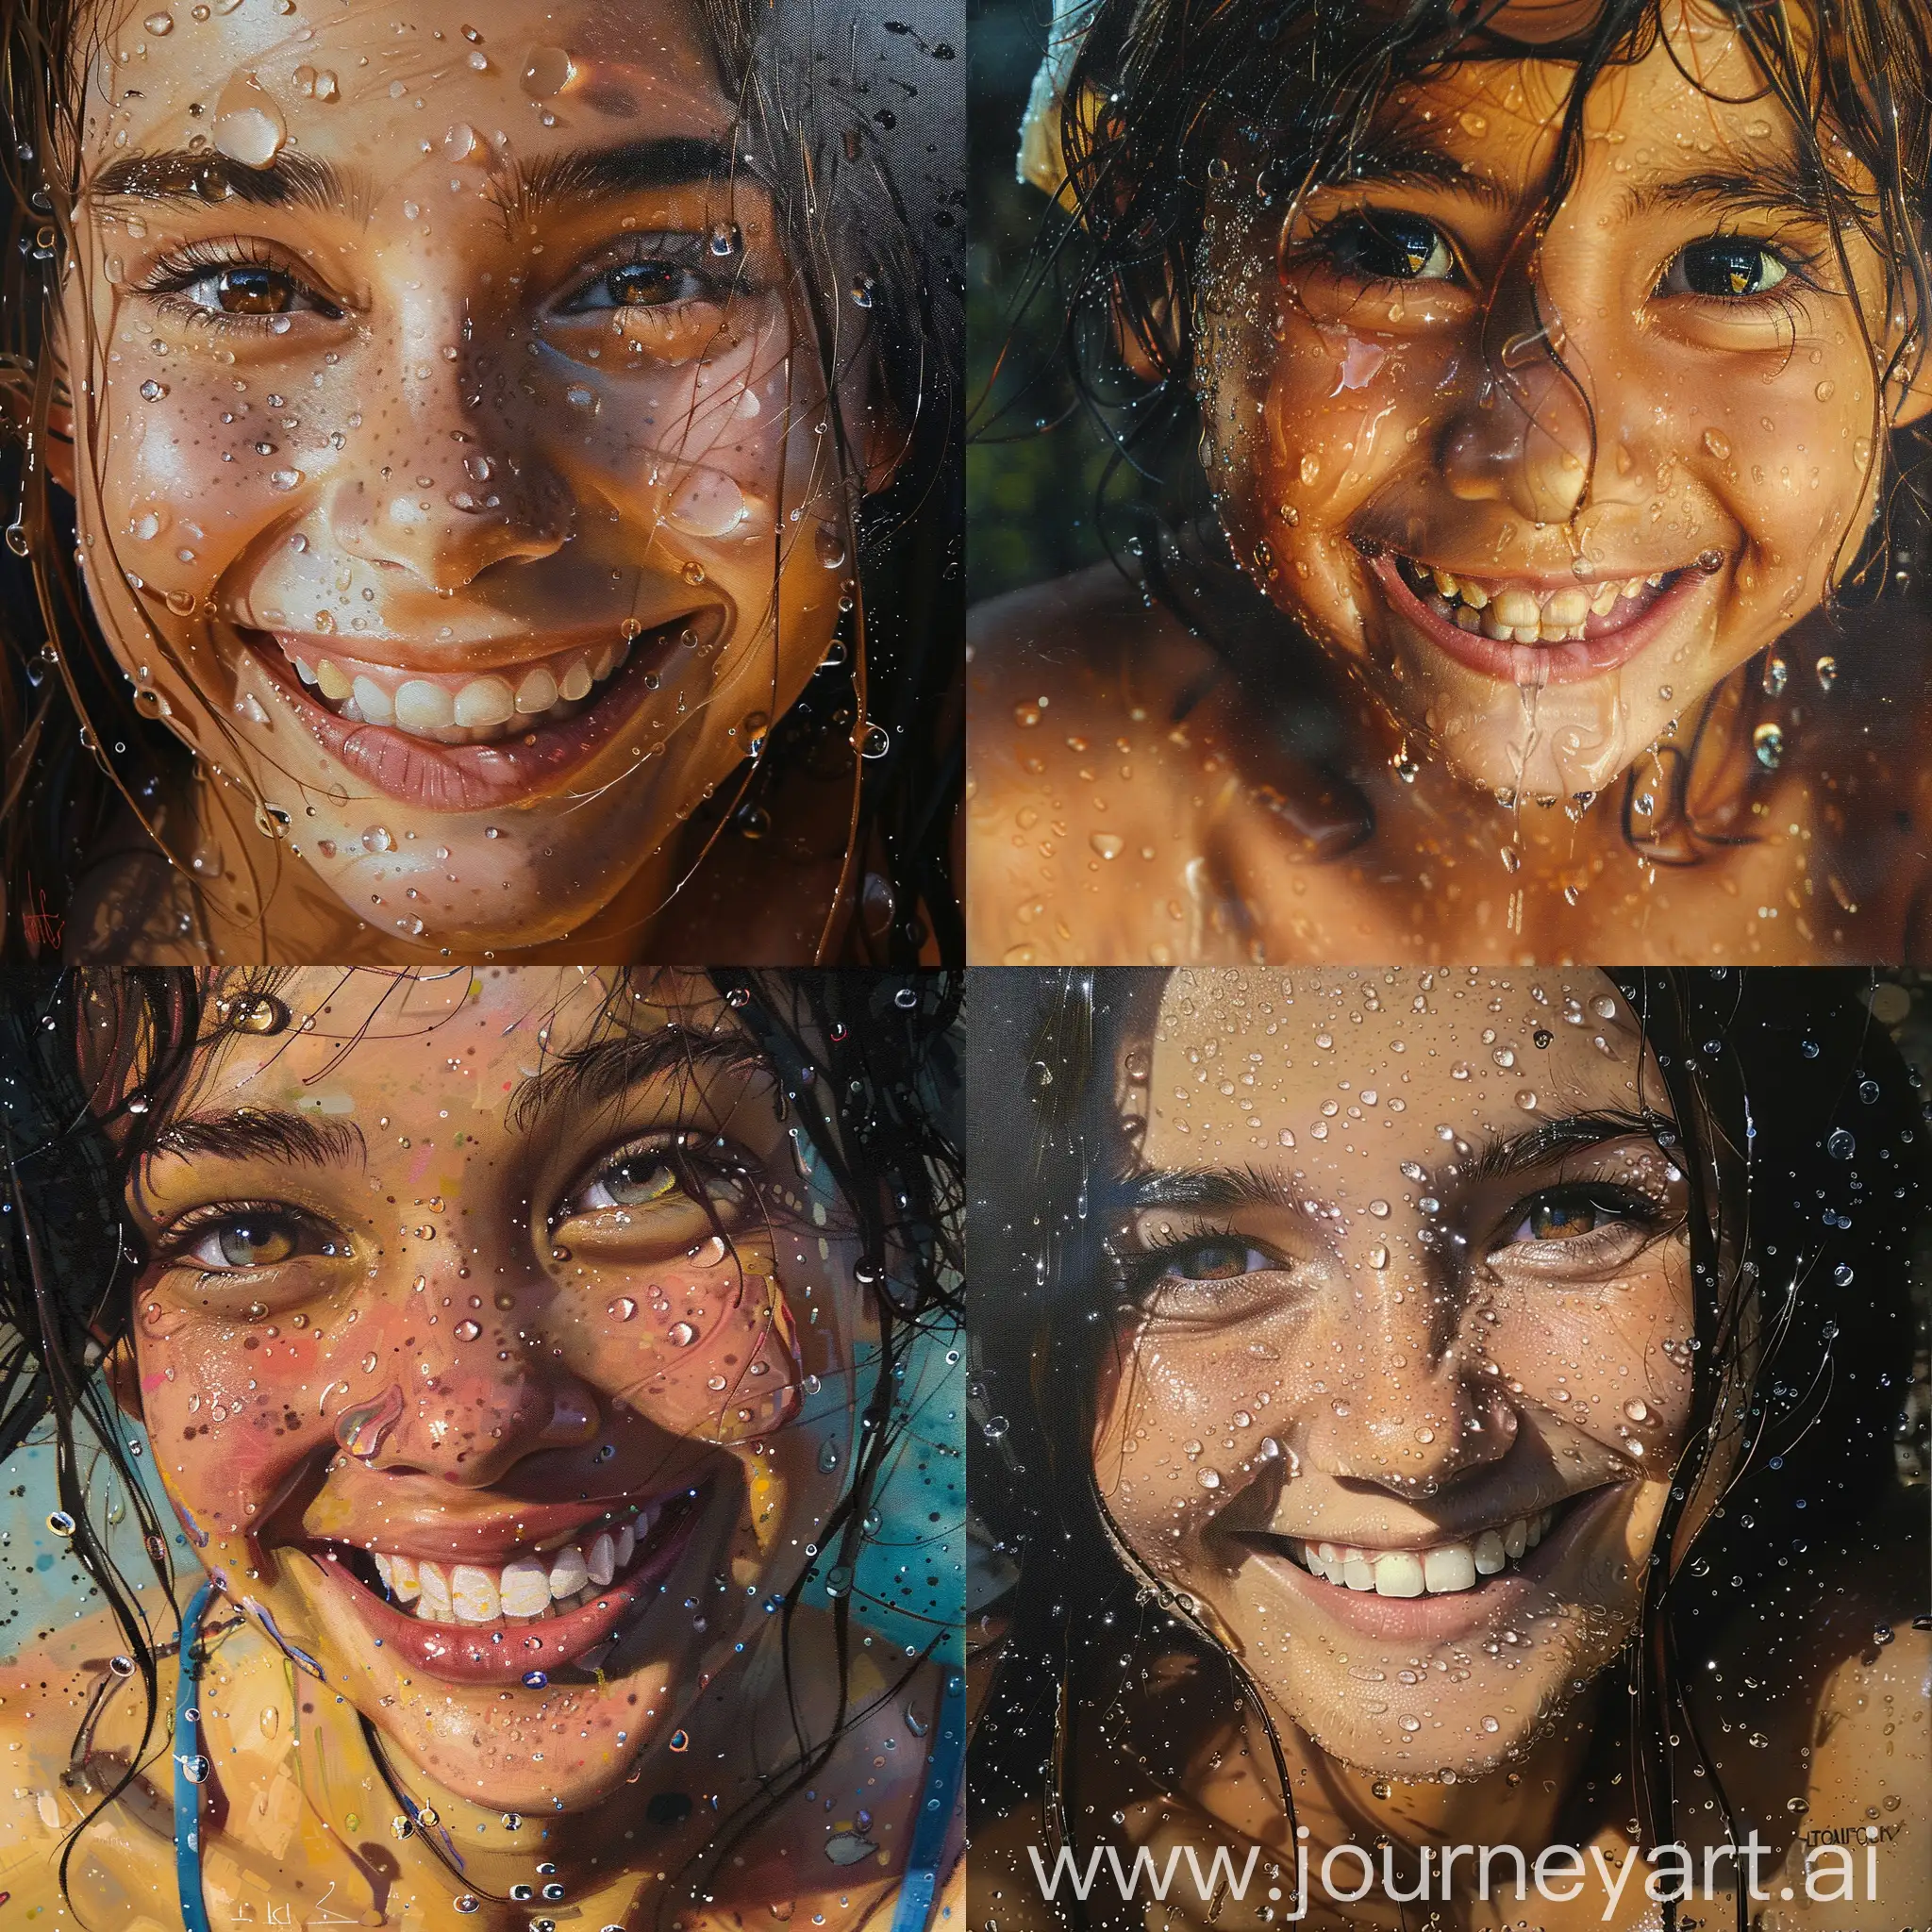 Artyoung sffican girl smiling with water droplets on her face